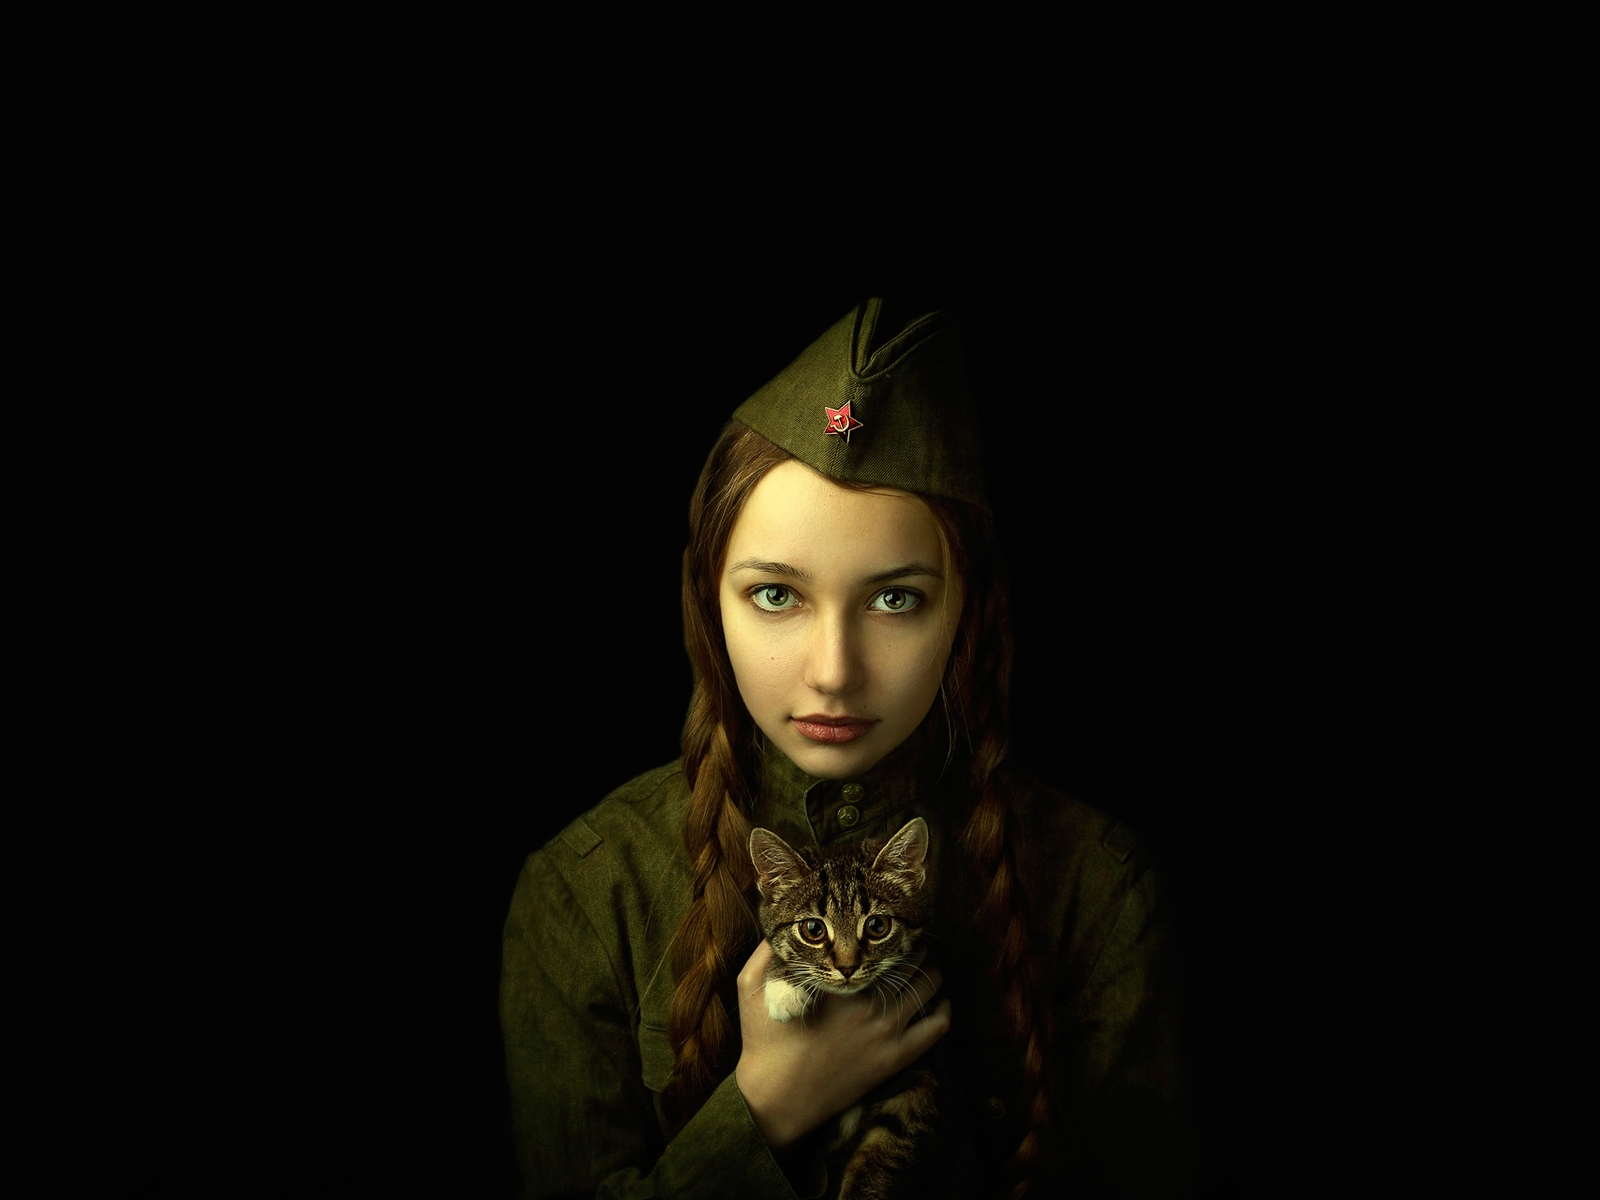 Soldier Girl Portrait for 1600 x 1200 resolution